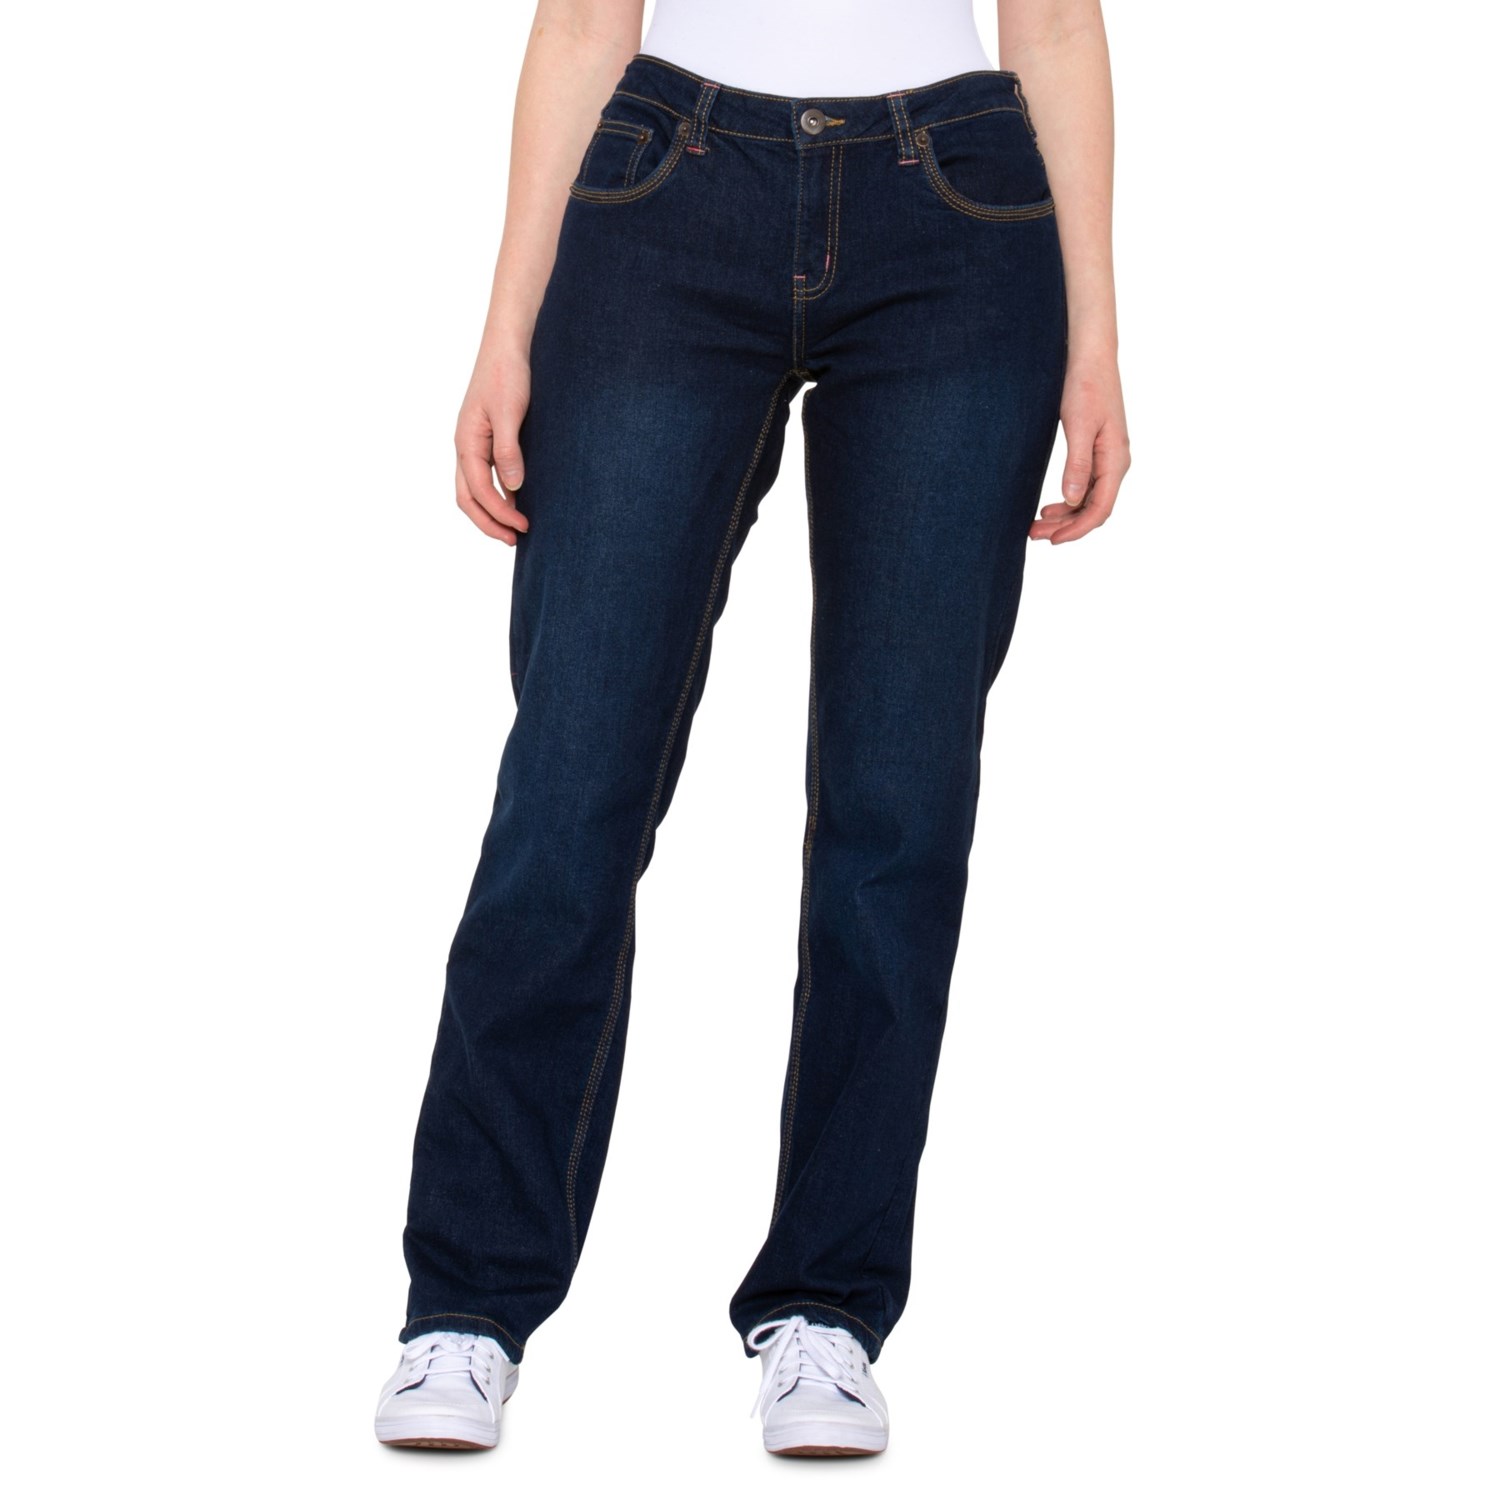 Telluride Flannel-Lined Jeans (For Women) - Save 21%